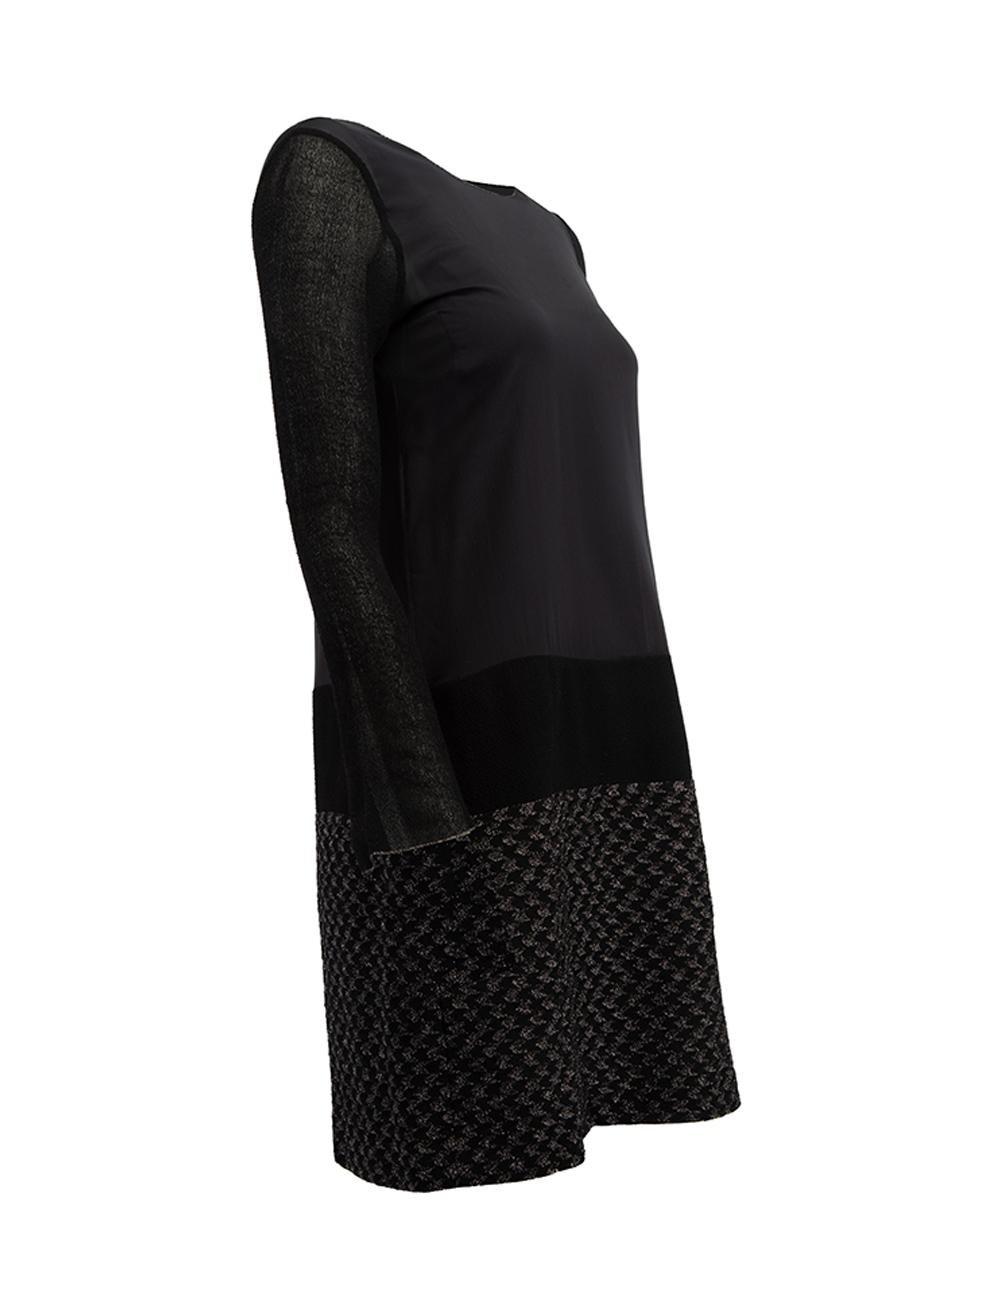 CONDITION is Very good. Hardly any visible wear to dress is evident on this used Missoni designer resale item. Details Black Synthetic Mini dress Layered mesh design Boat neckline Houndstooth panel on skirt Made in Italy Composition 42% Wool, 23%